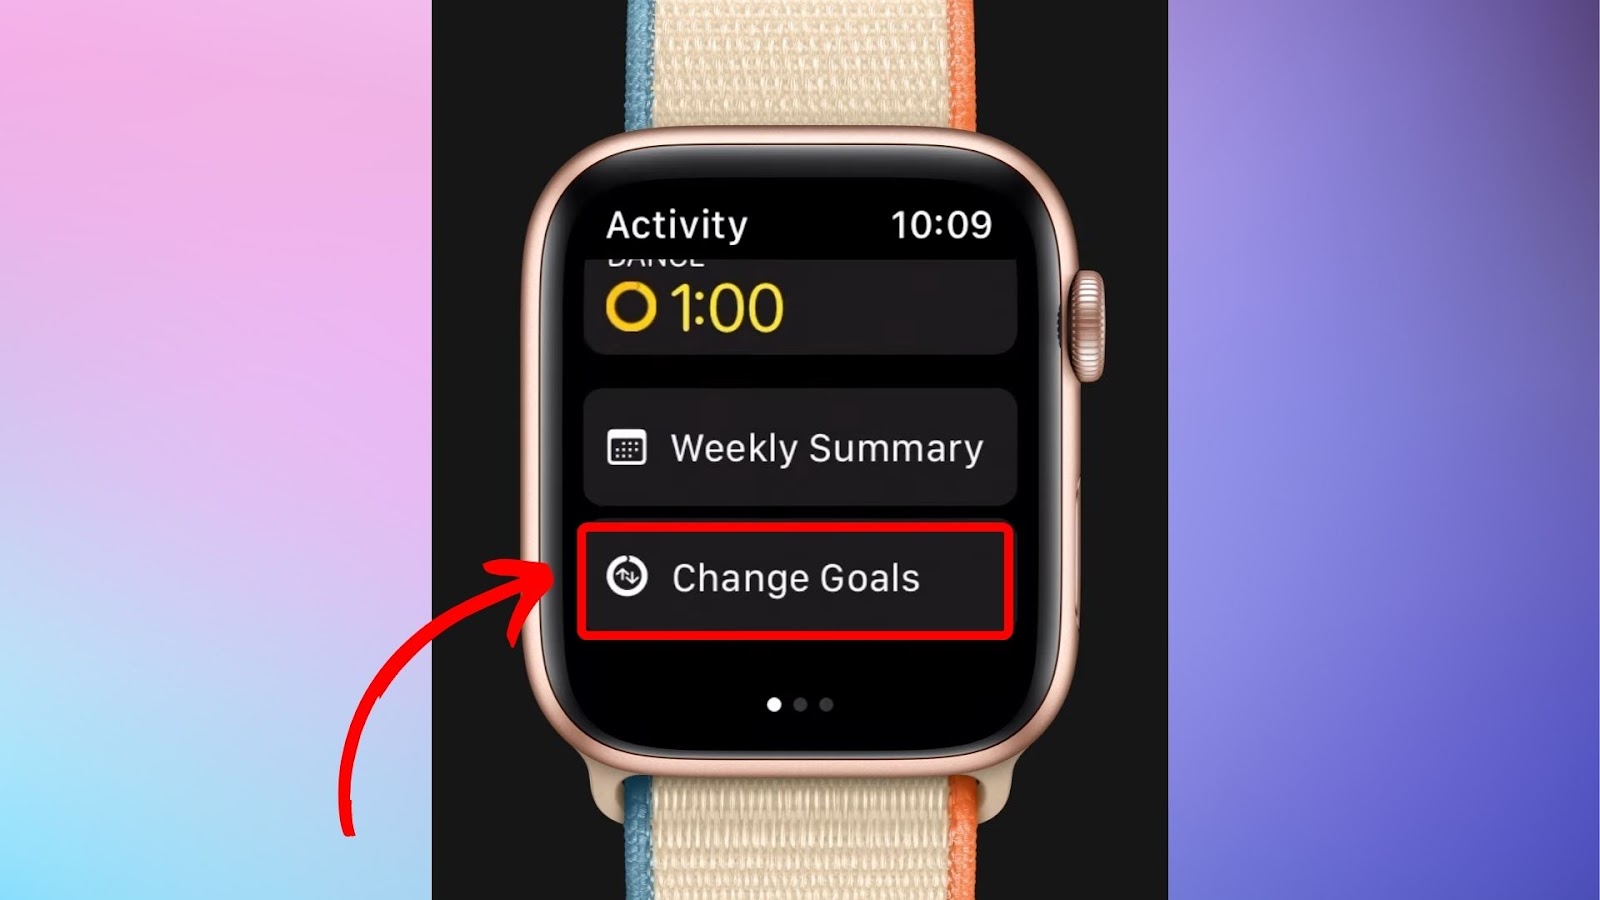 How to Change Goals on Apple Watch